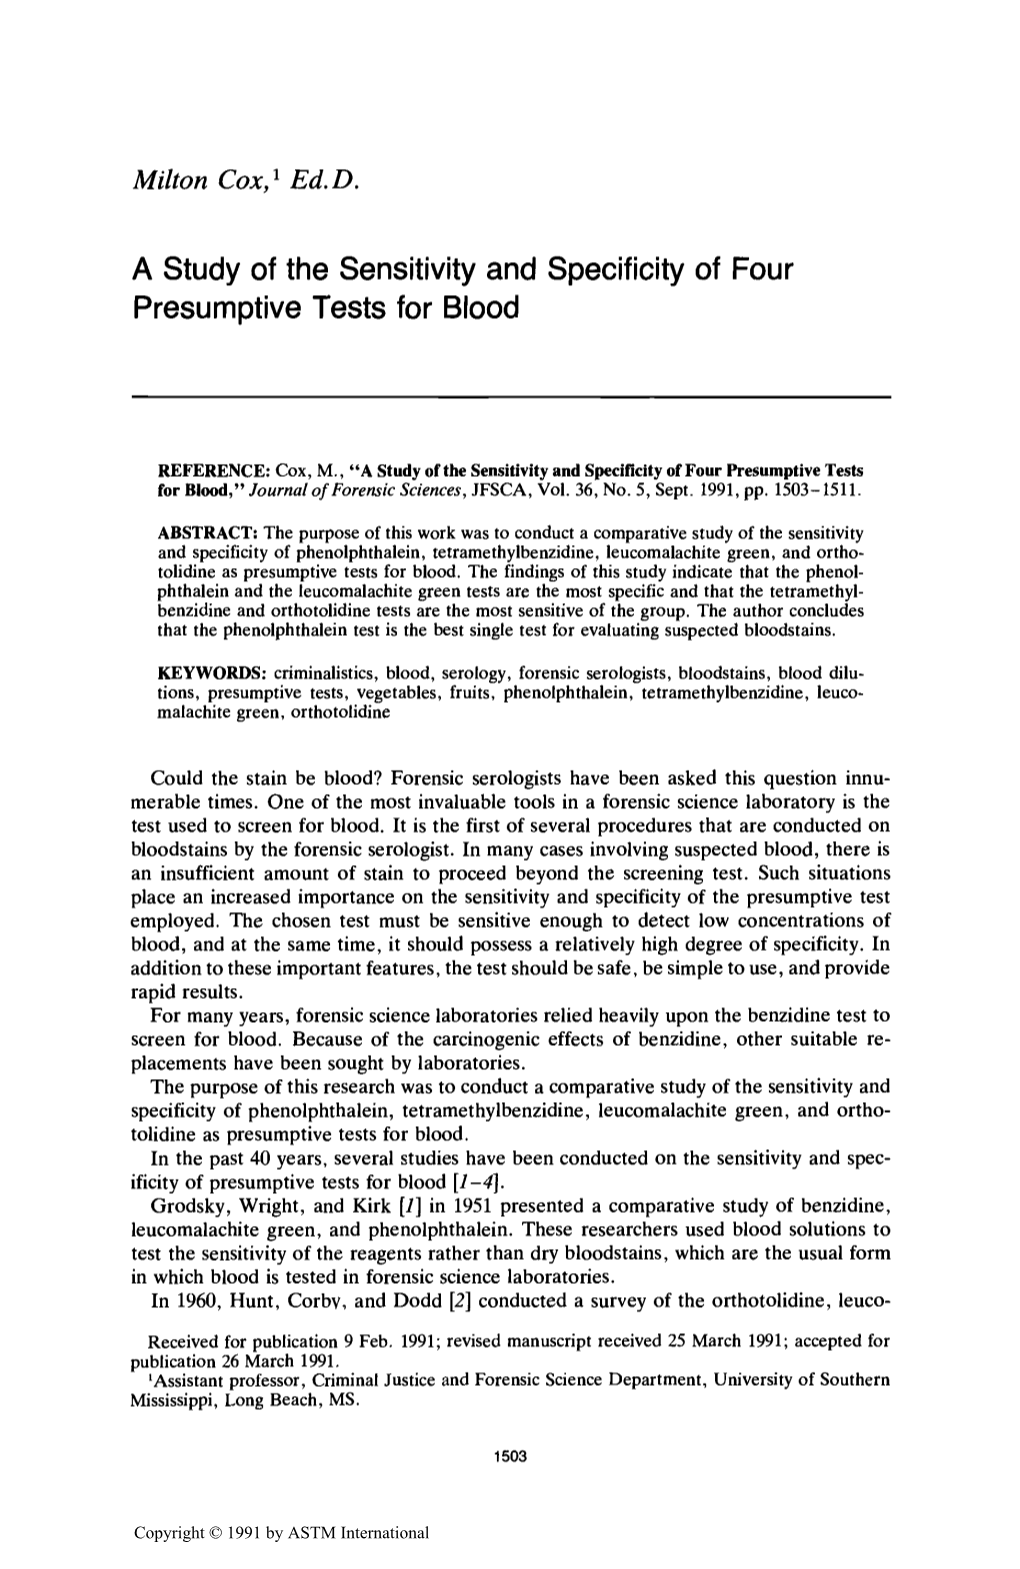 A Study of the Sensitivity and Specificity of Four Presumptive Tests for Blood